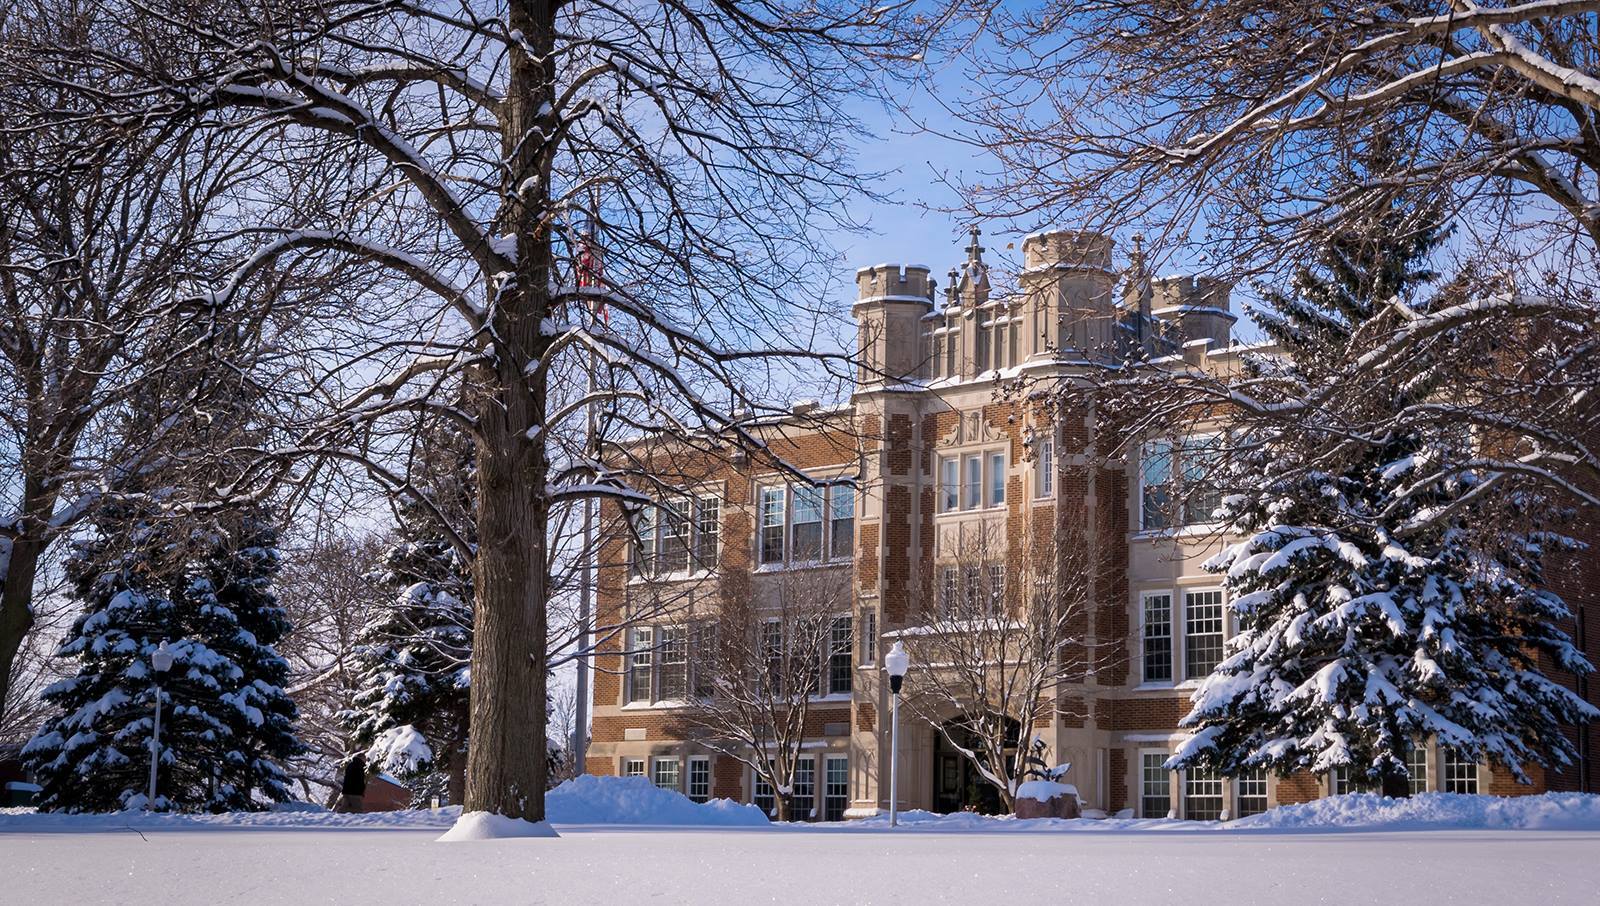 <p>South Dakota’s <a href="http://www.augie.edu/" rel="noreferrer noopener">Augustana University</a>, a small liberal arts college, is home to elegant brick and stone buildings and the charming Beaver Creek Lutheran Church.</p><p><a href="https://www.facebook.com/AugustanaSD/photos/a.10150606856121219/10156235605086219" rel="noreferrer noopener">See photo on Facebook</a></p>